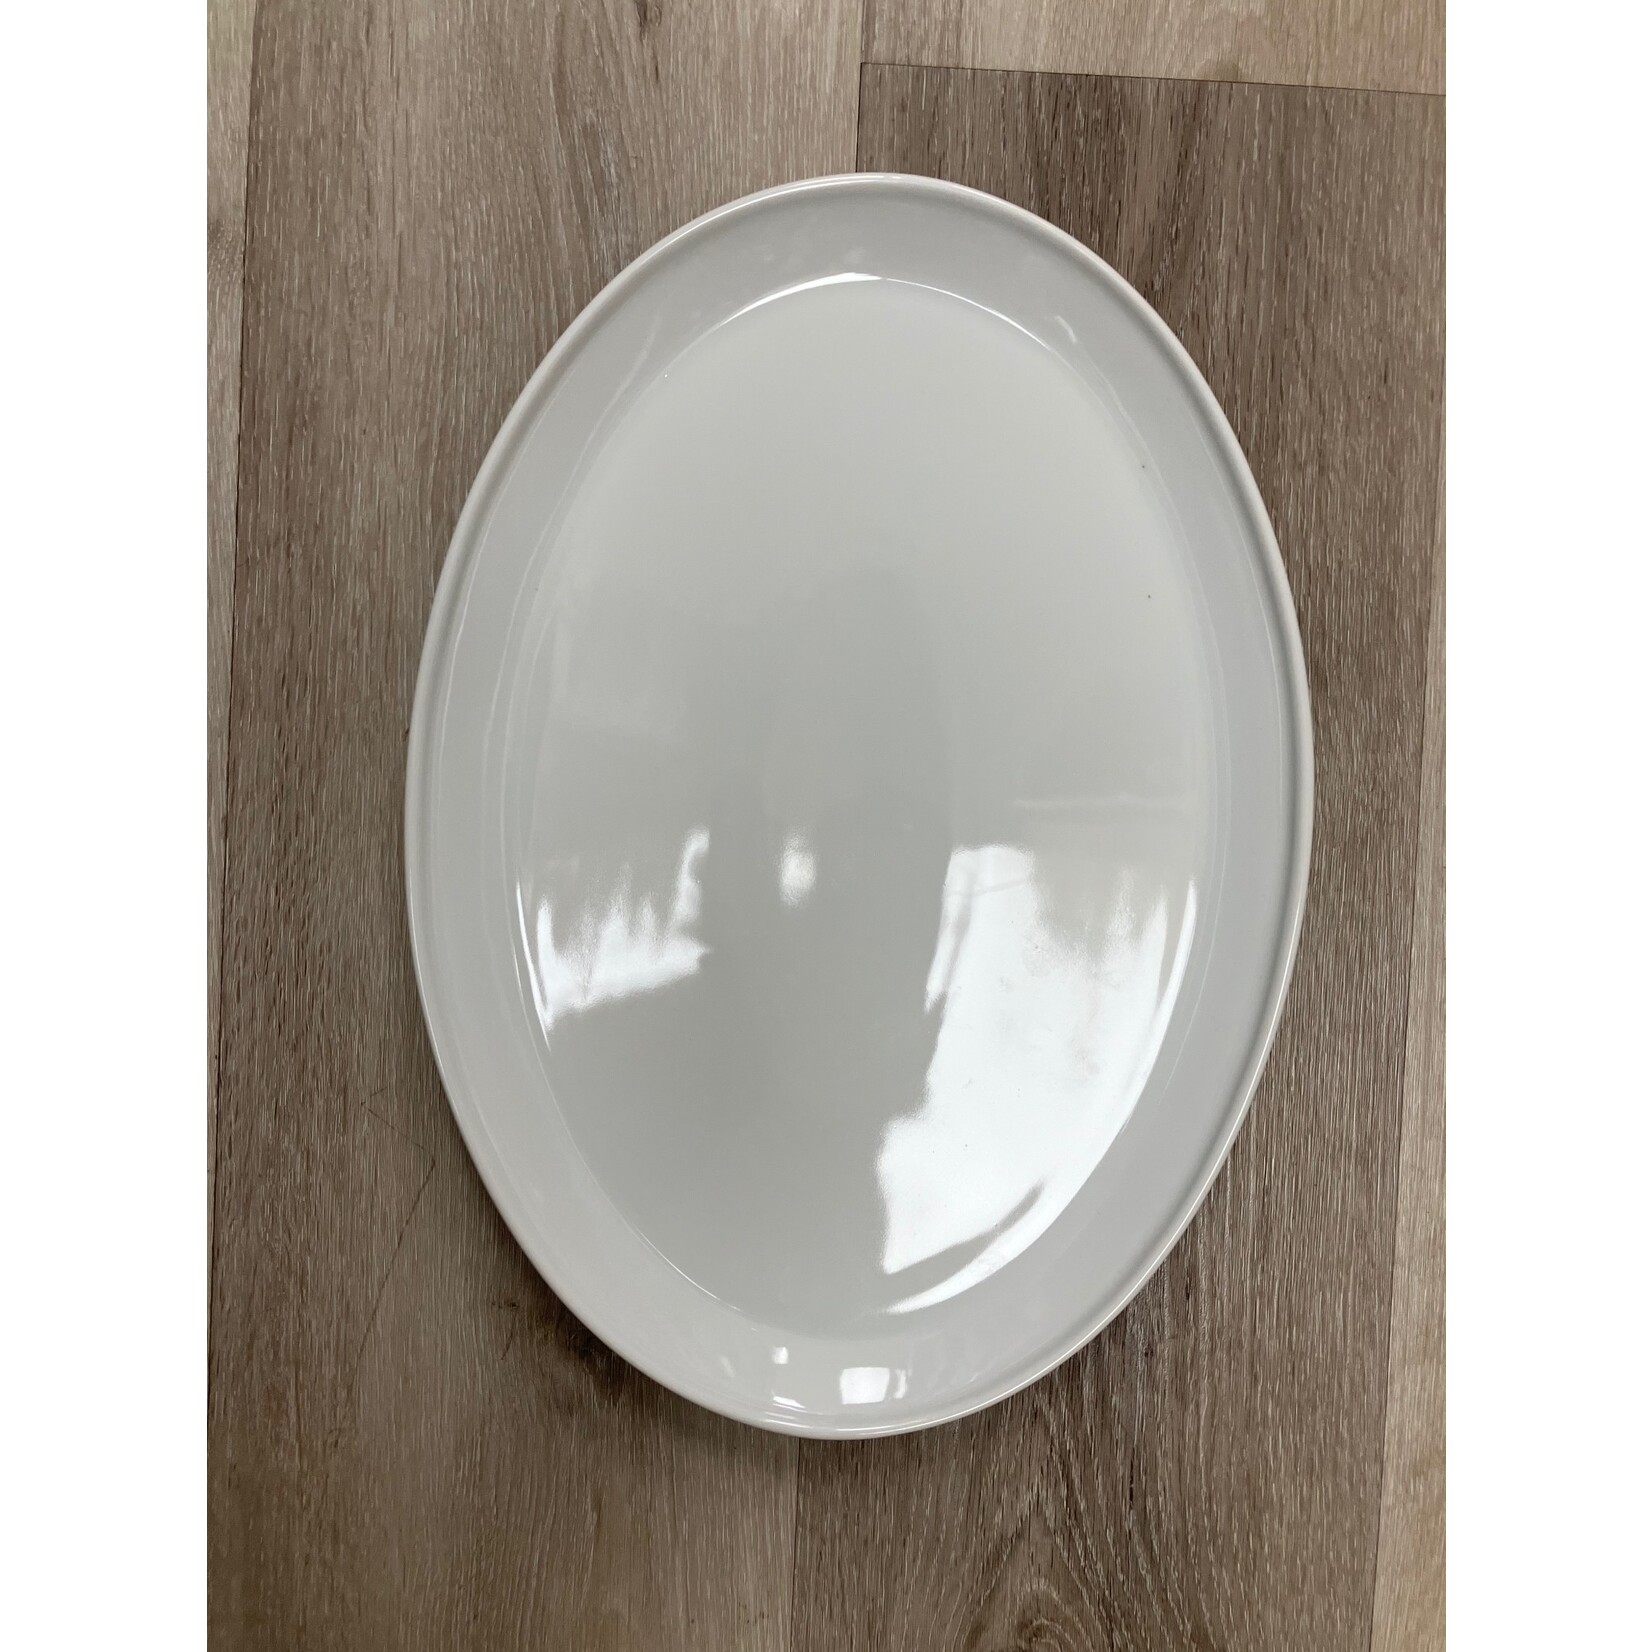 Palate and Plate AW-0150 14 X 10" oval platter 12/case